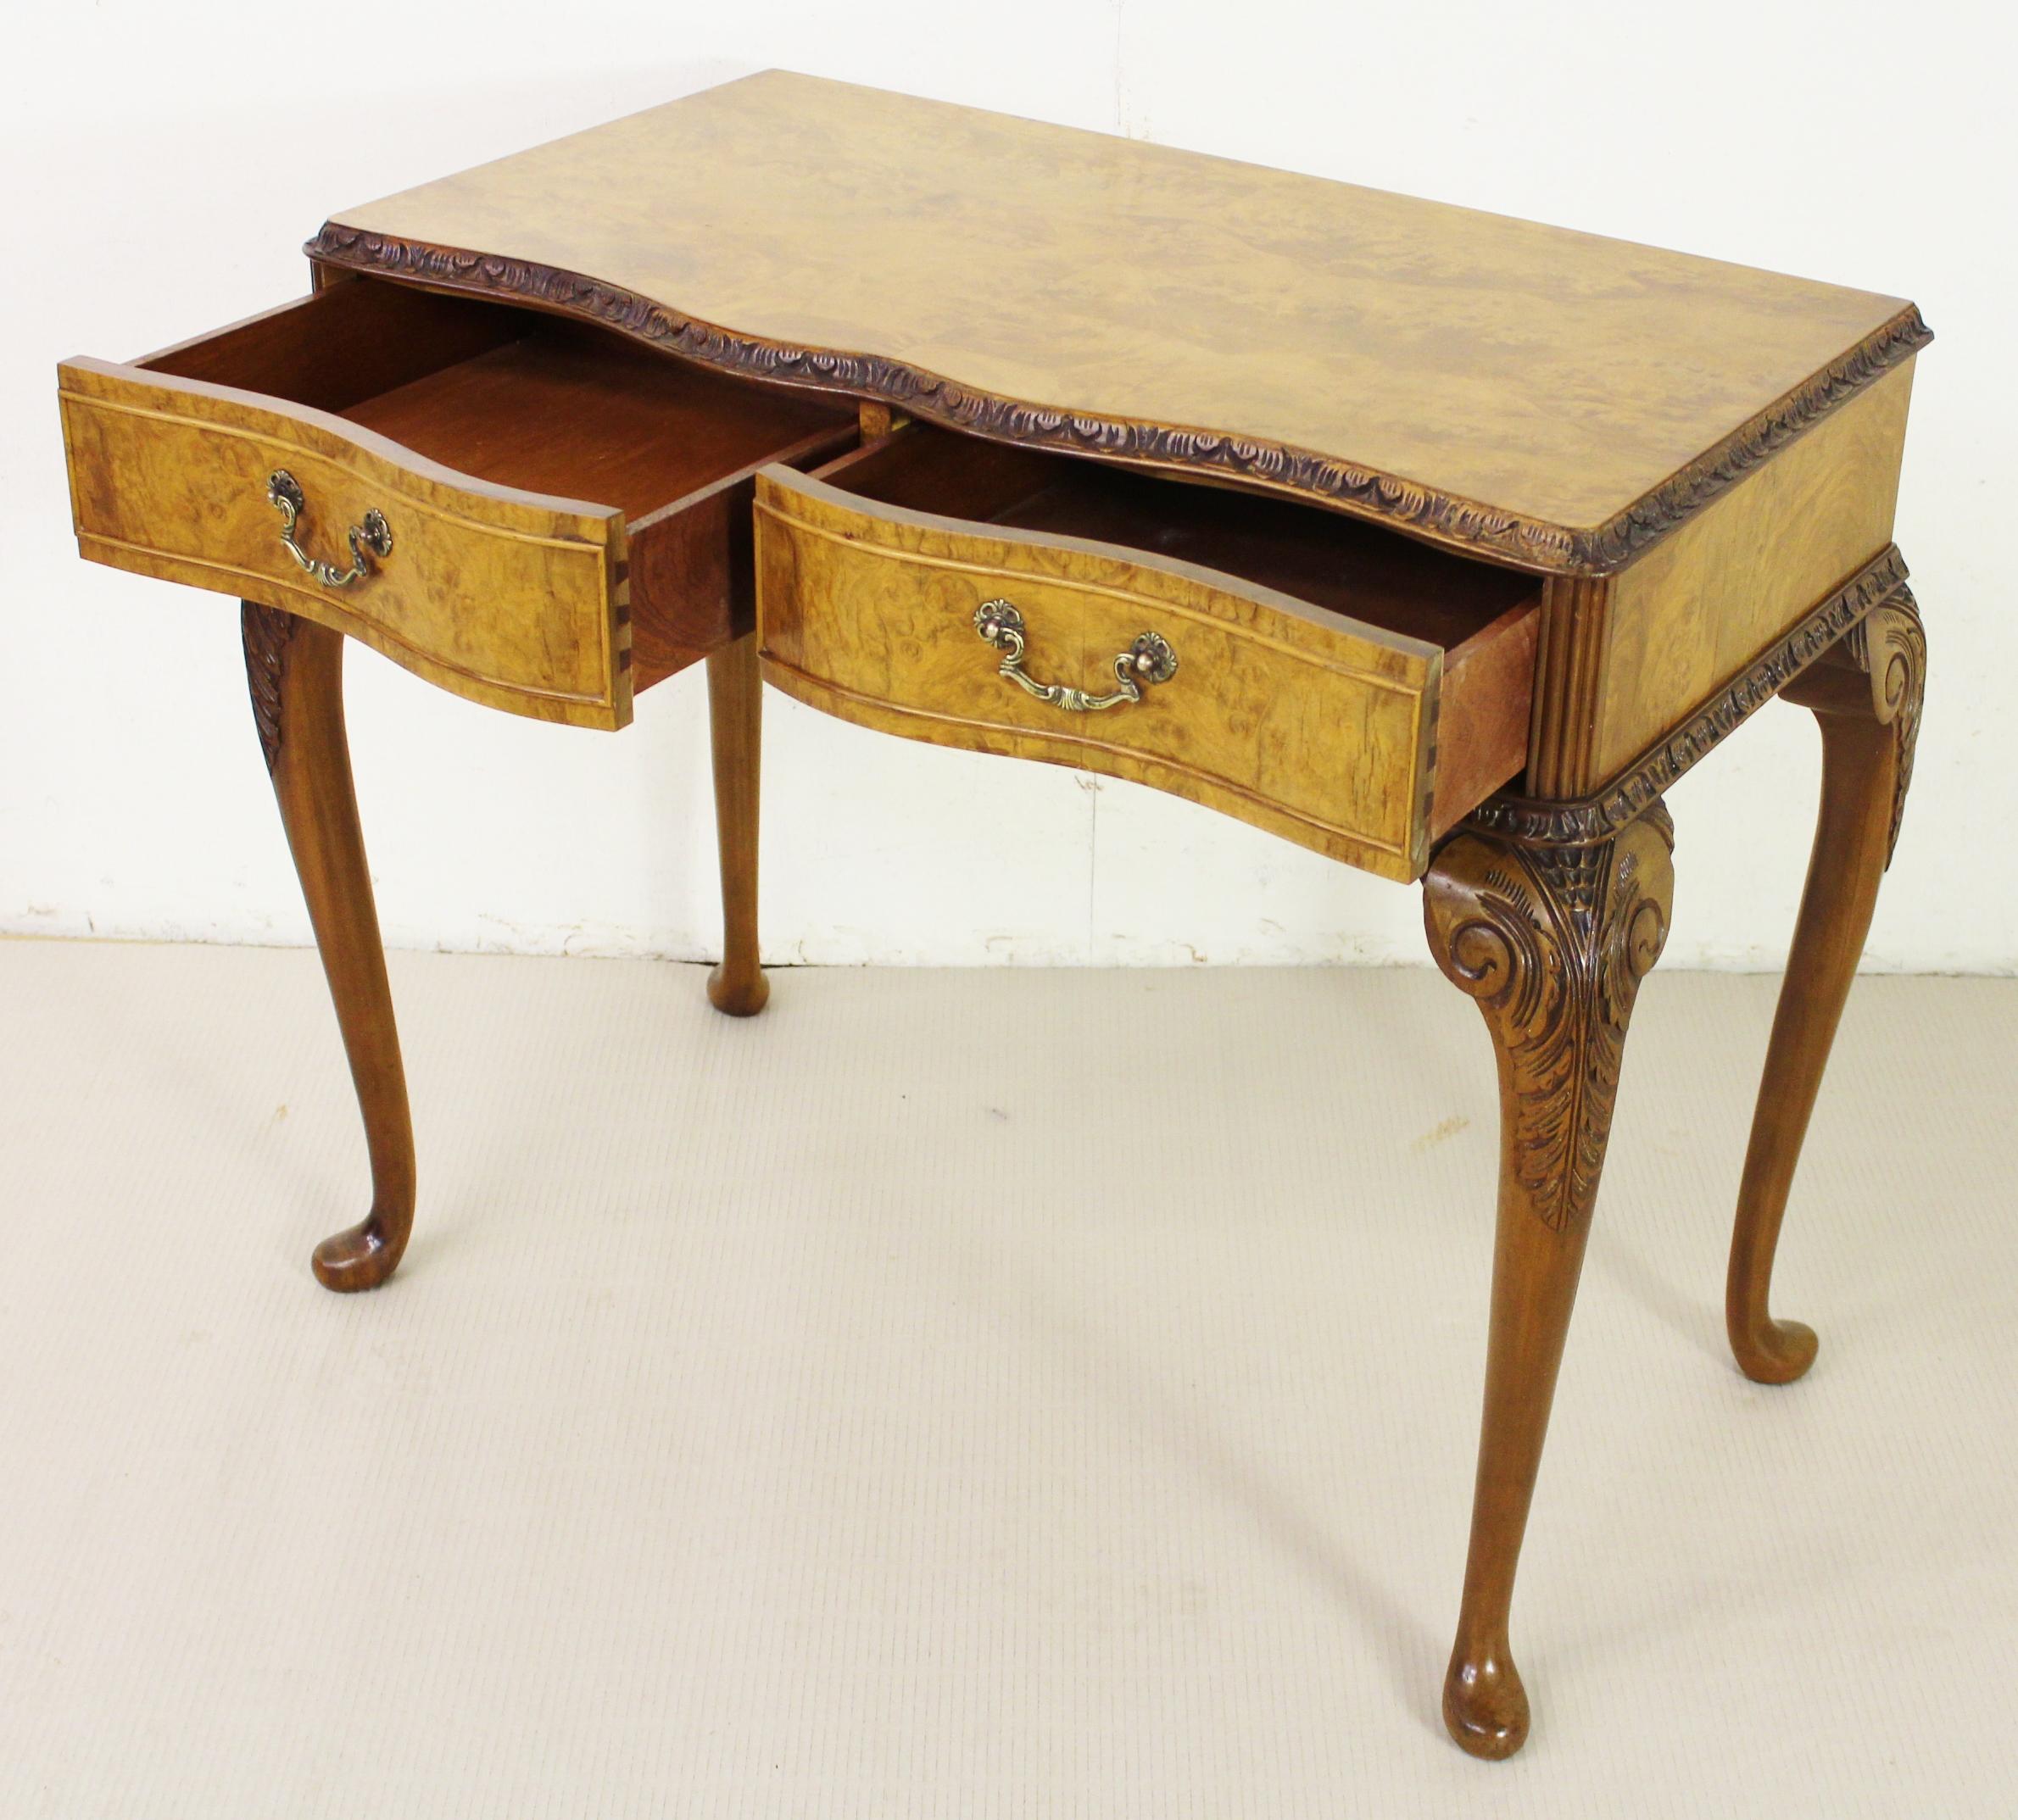 English Early 20th Century Serpentine Shaped Burr Walnut Side Table